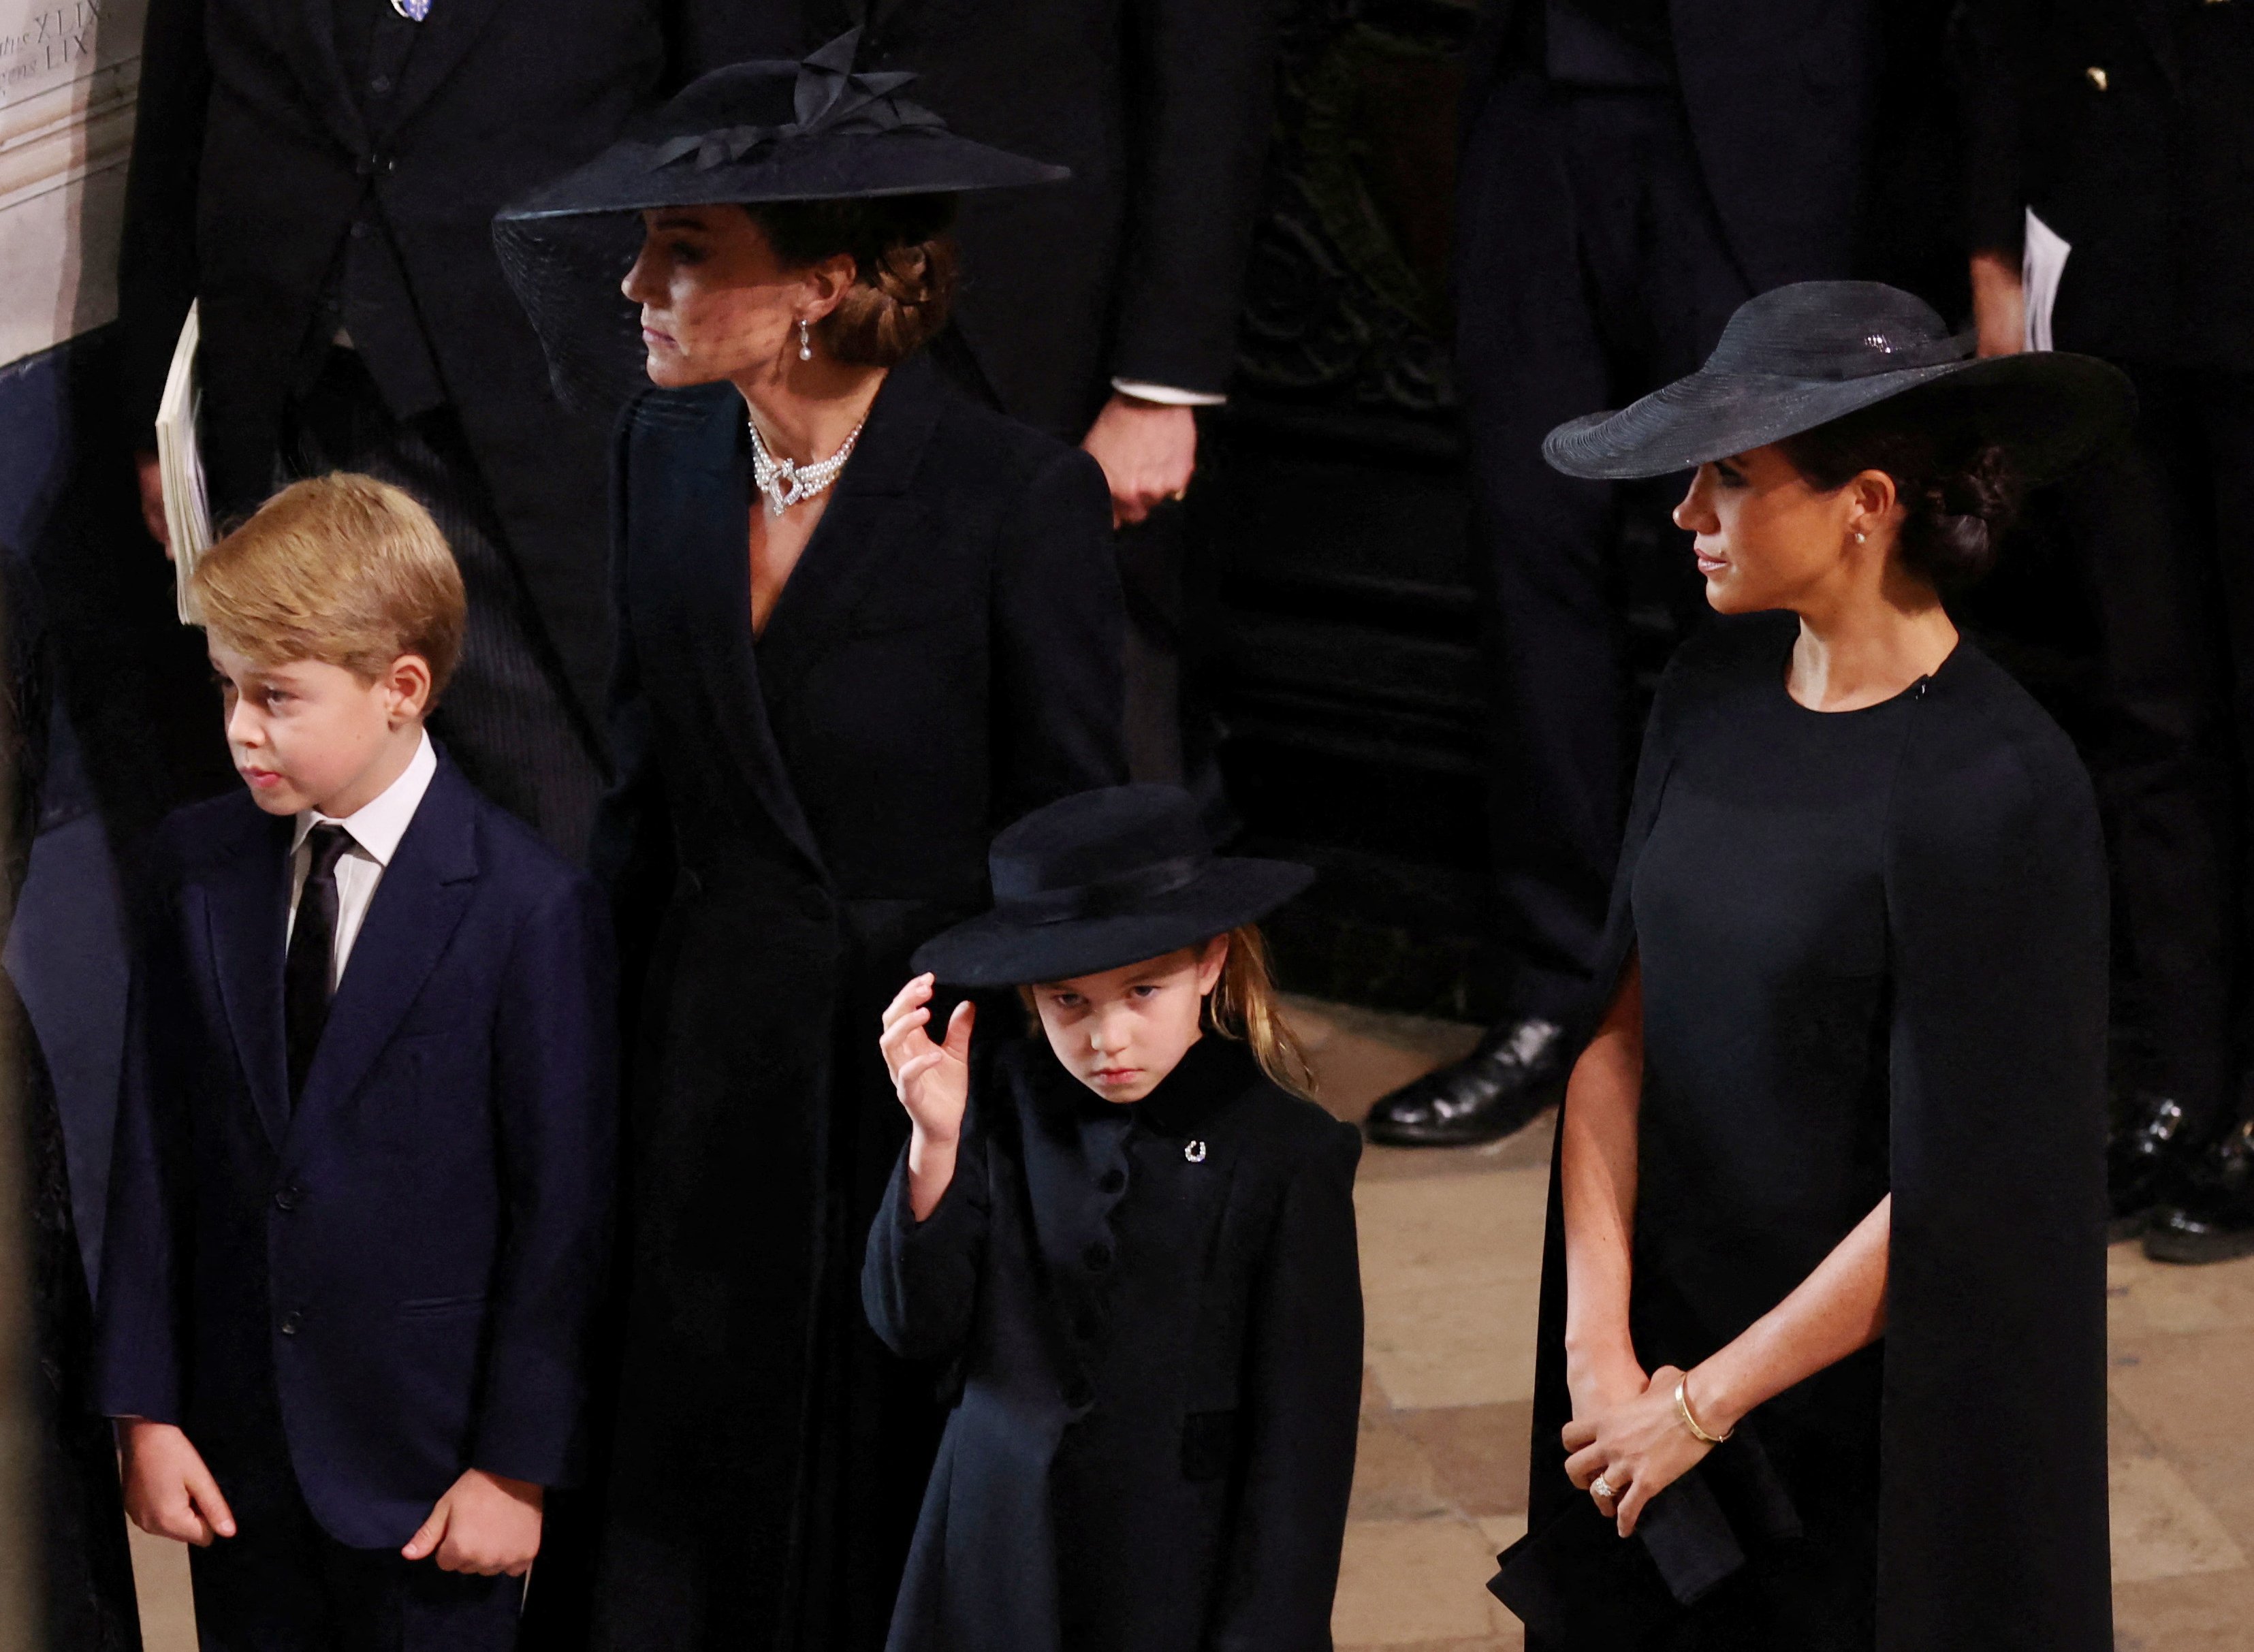 Catherine, Princess of Wales, Princess, Prince George and Meghan, arrive at Westminster Abbey for the State Funeral of Queen Elizabeth II on September 19, 2022 in London, England. | Source: Getty Images